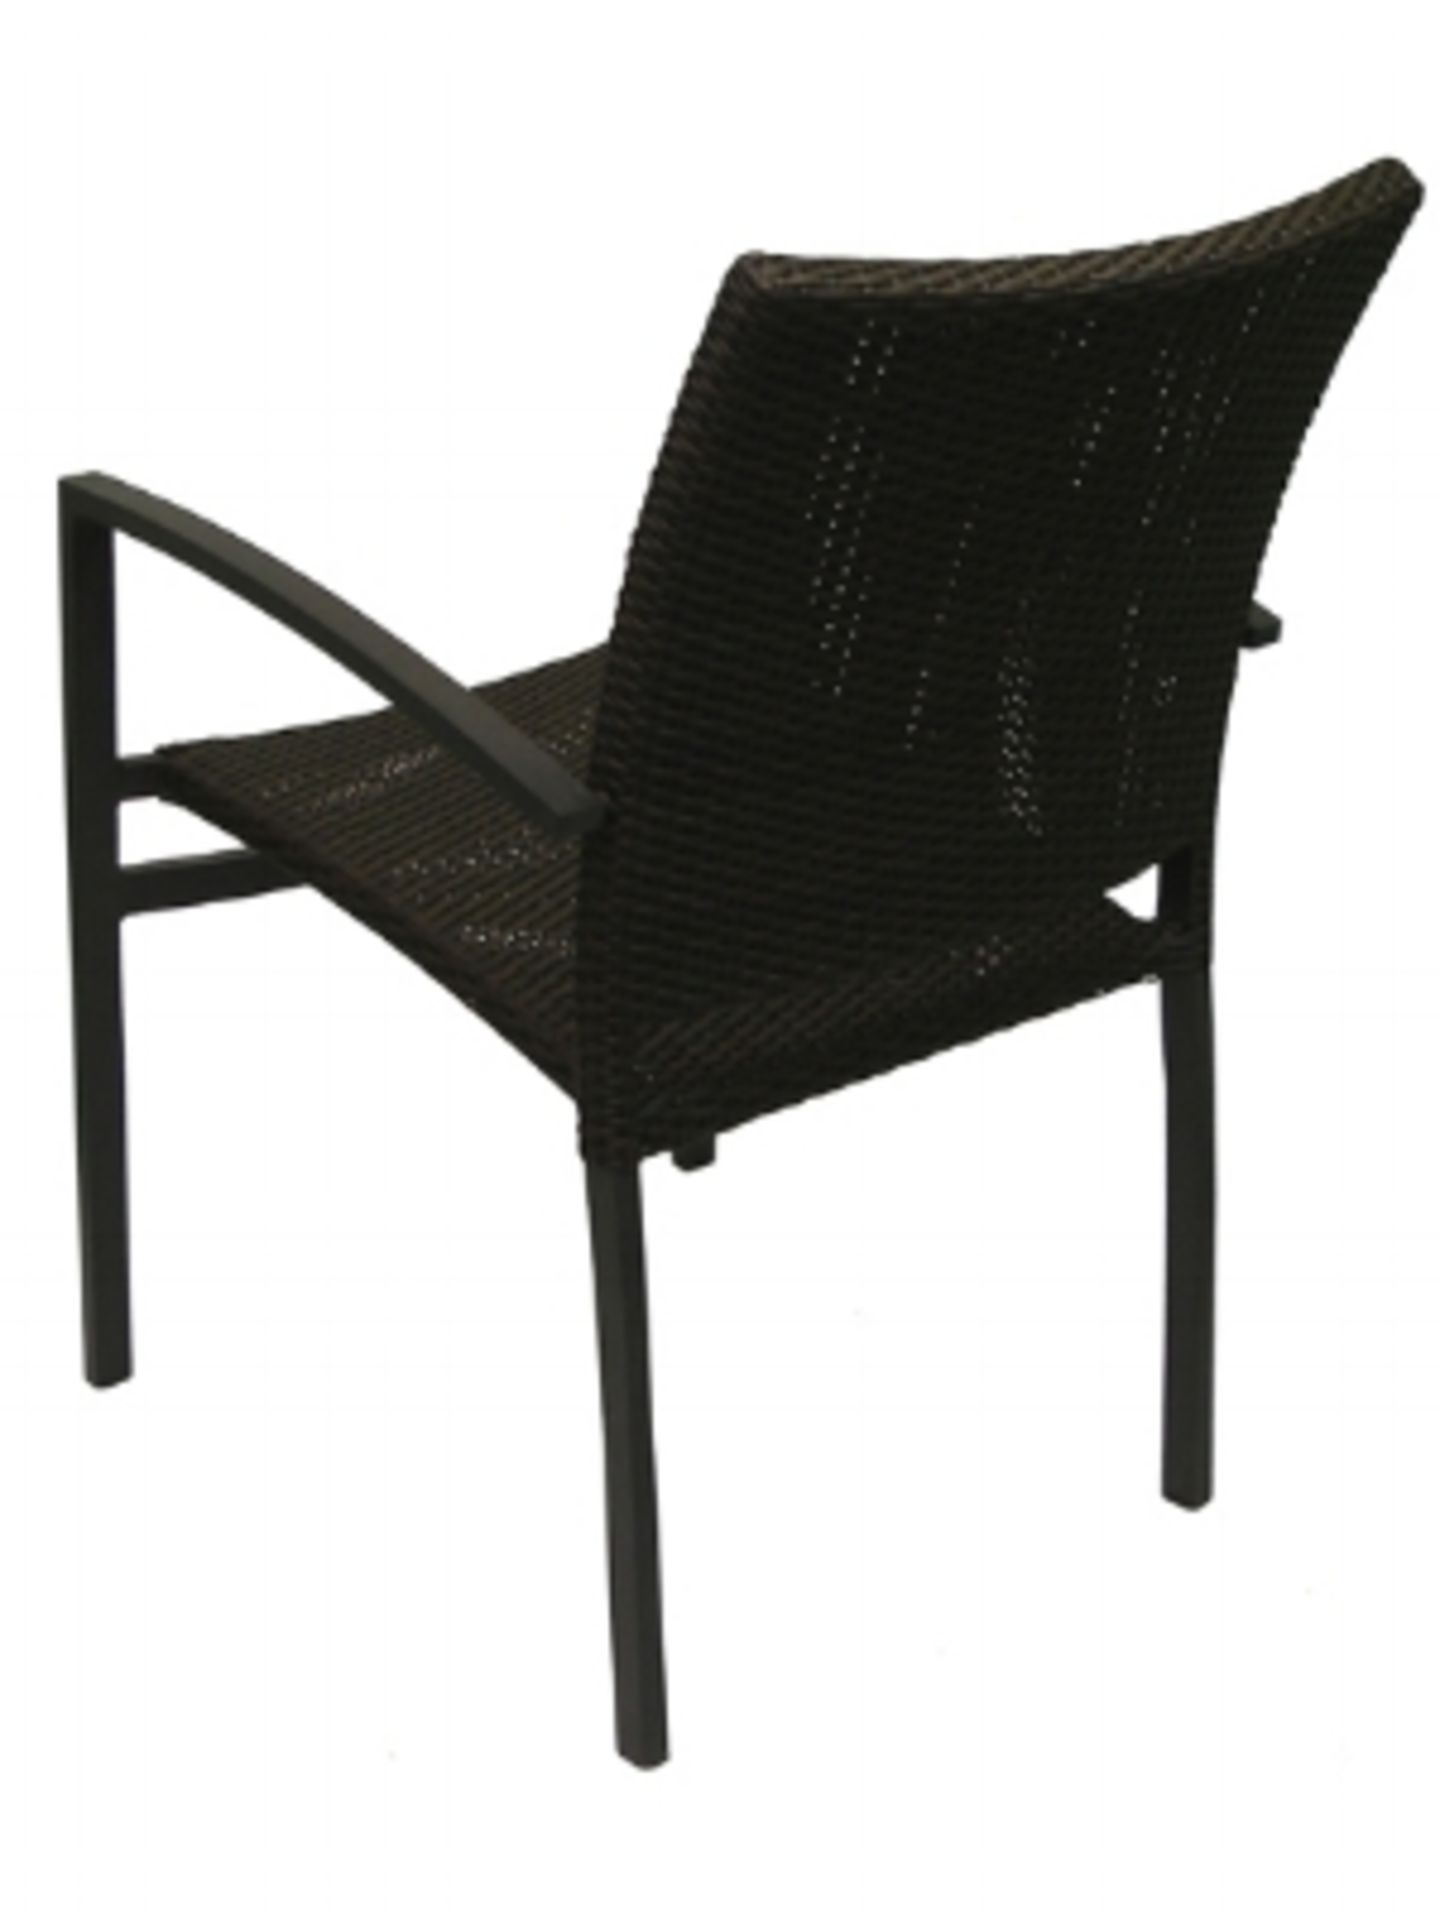 Oviedo Side Chair - Espresso. Powder coated tubular heavyweight aluminum frame with fade-resistant - Image 2 of 6